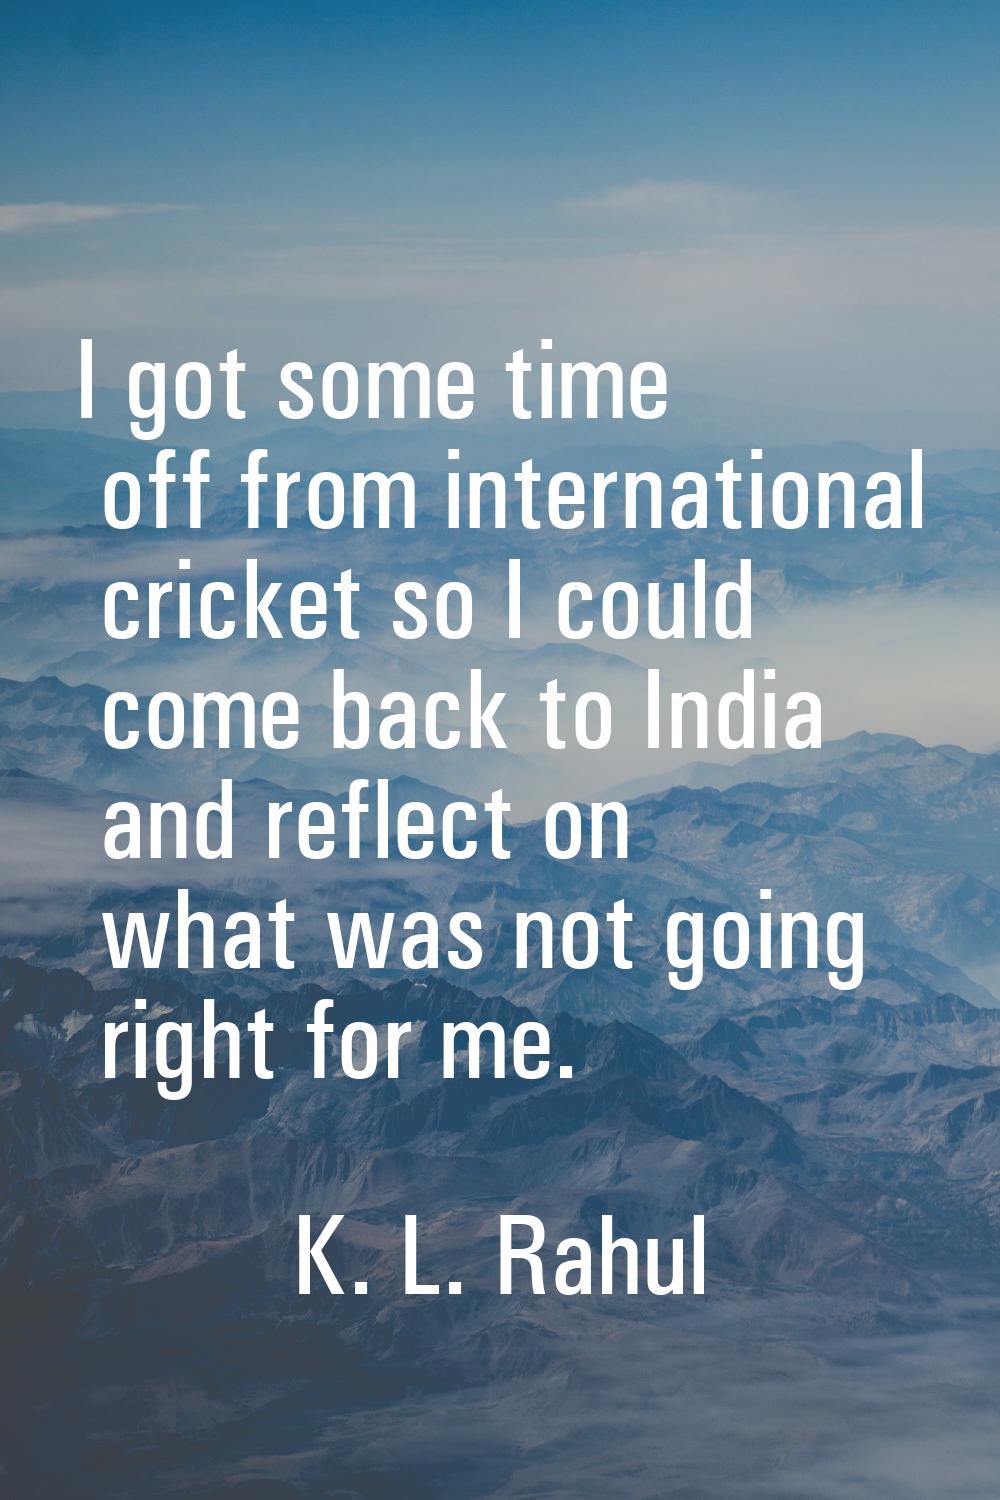 I got some time off from international cricket so I could come back to India and reflect on what wa